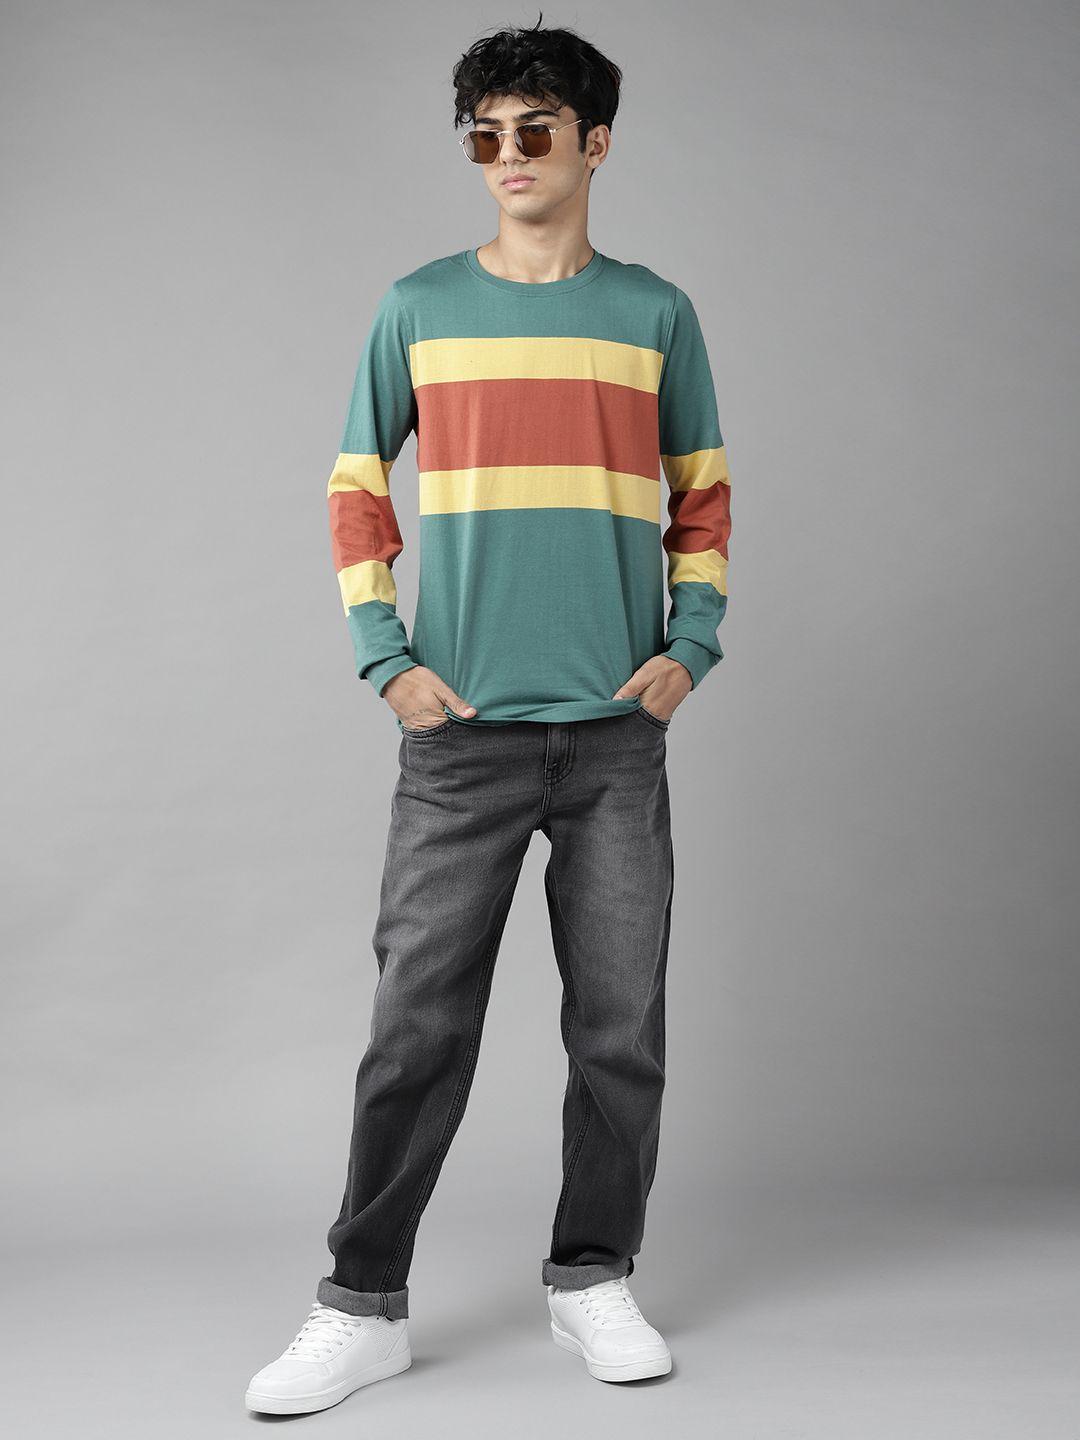 uth by roadster boys green & yellow striped pure cotton t-shirt